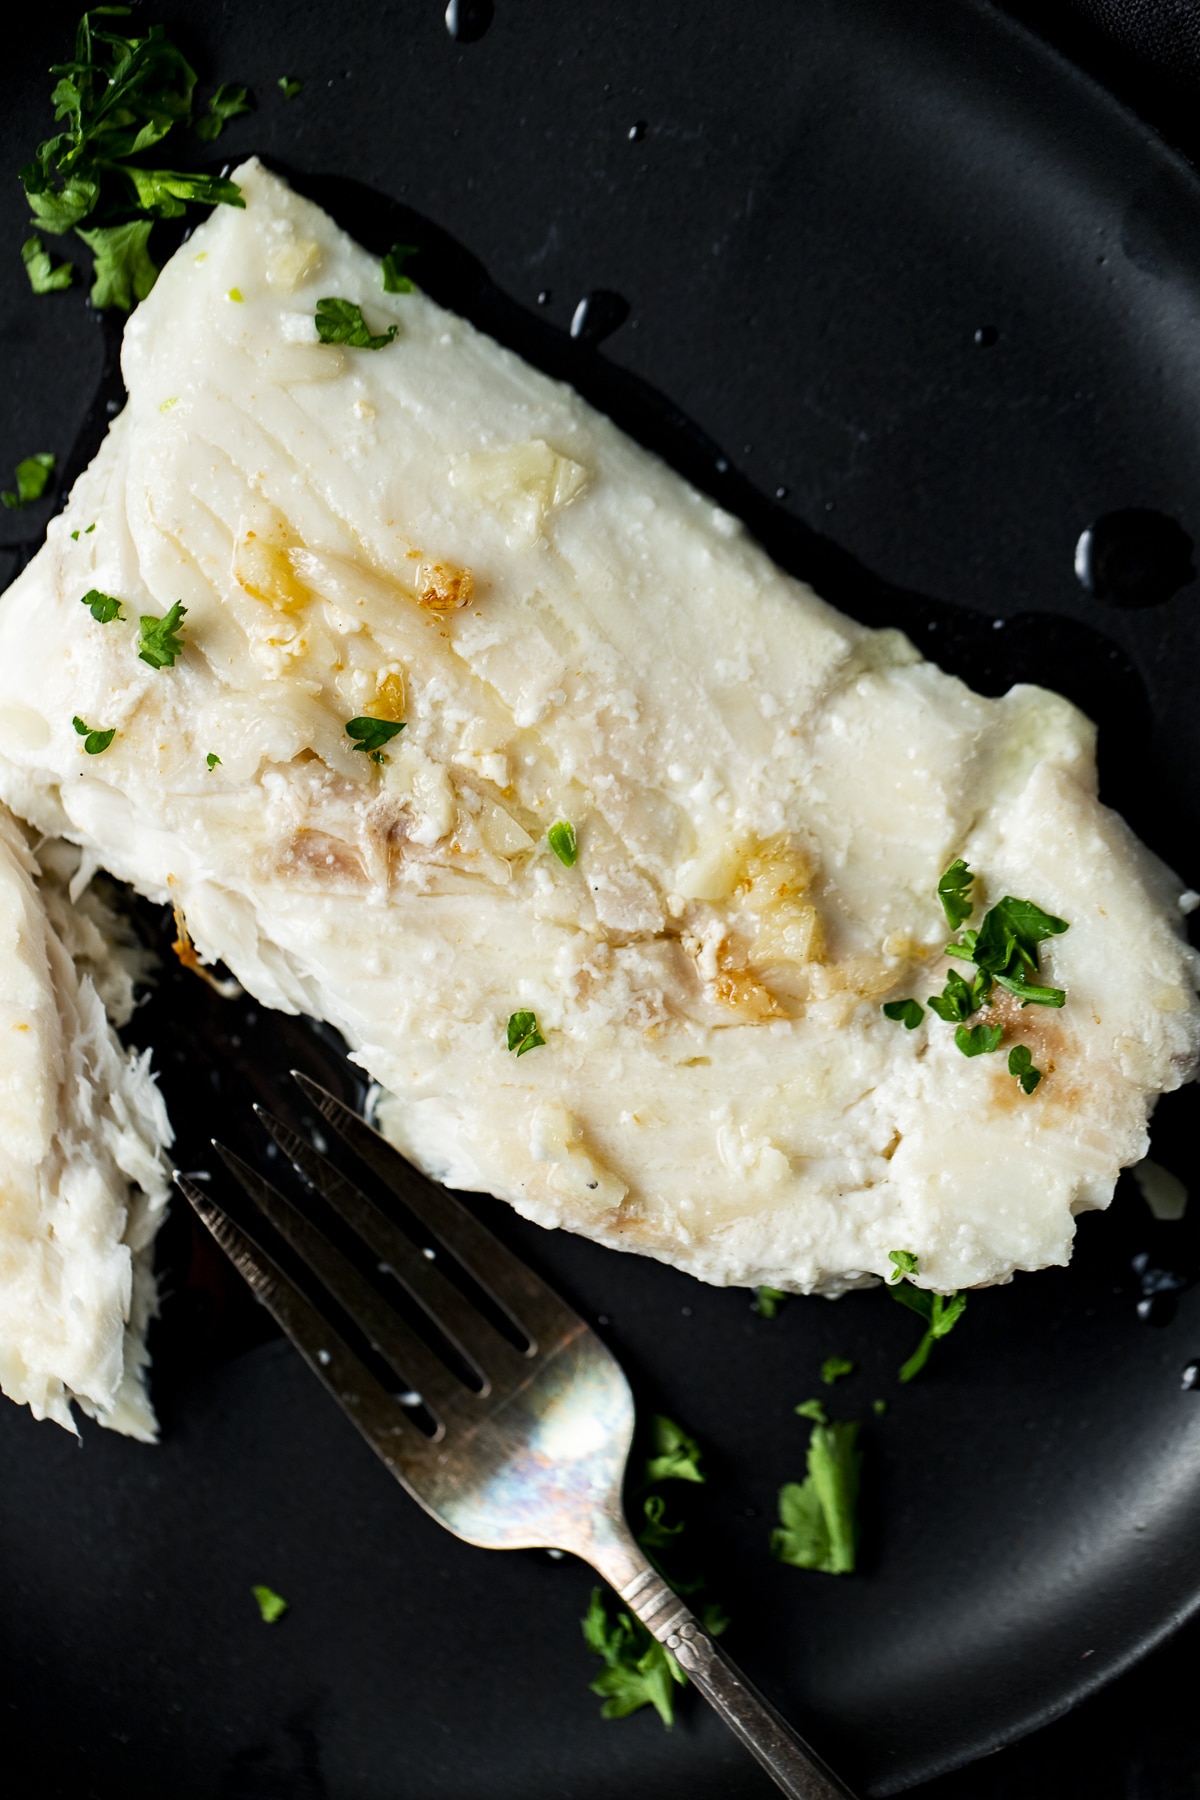 Overhead view of halibut on a black plate with a fork.